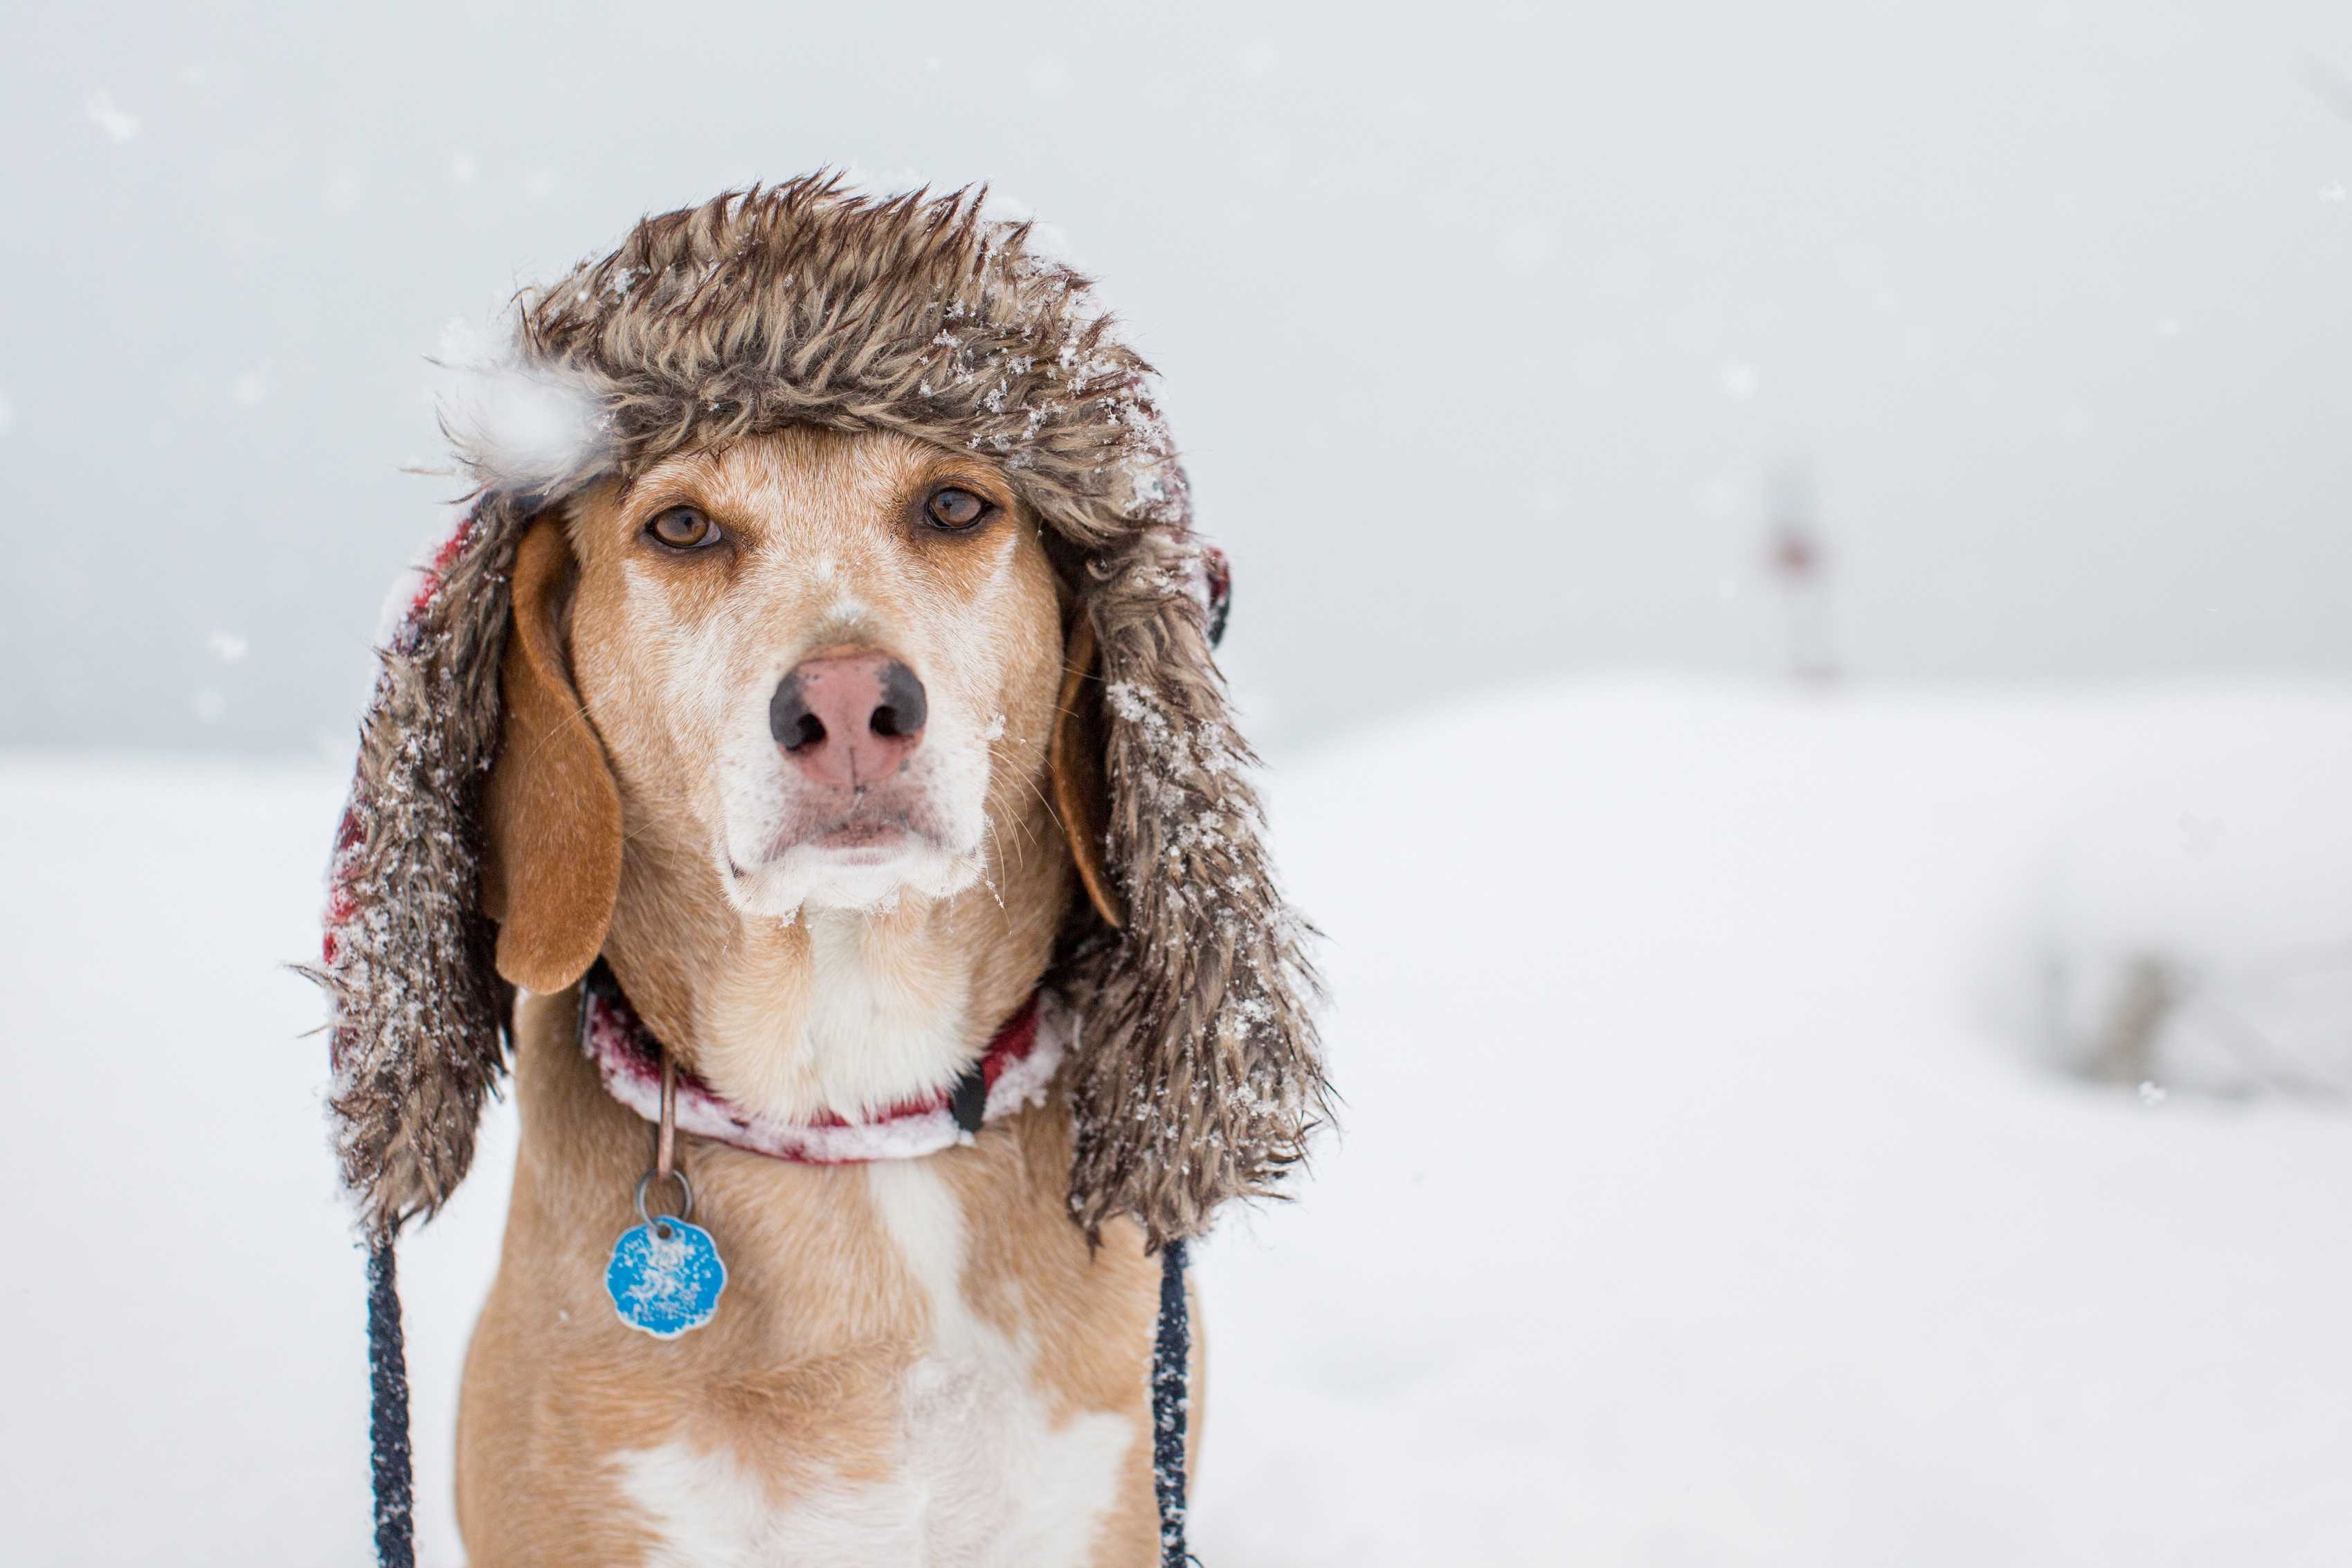 Creative ways to entertain your dog when it's cold outside